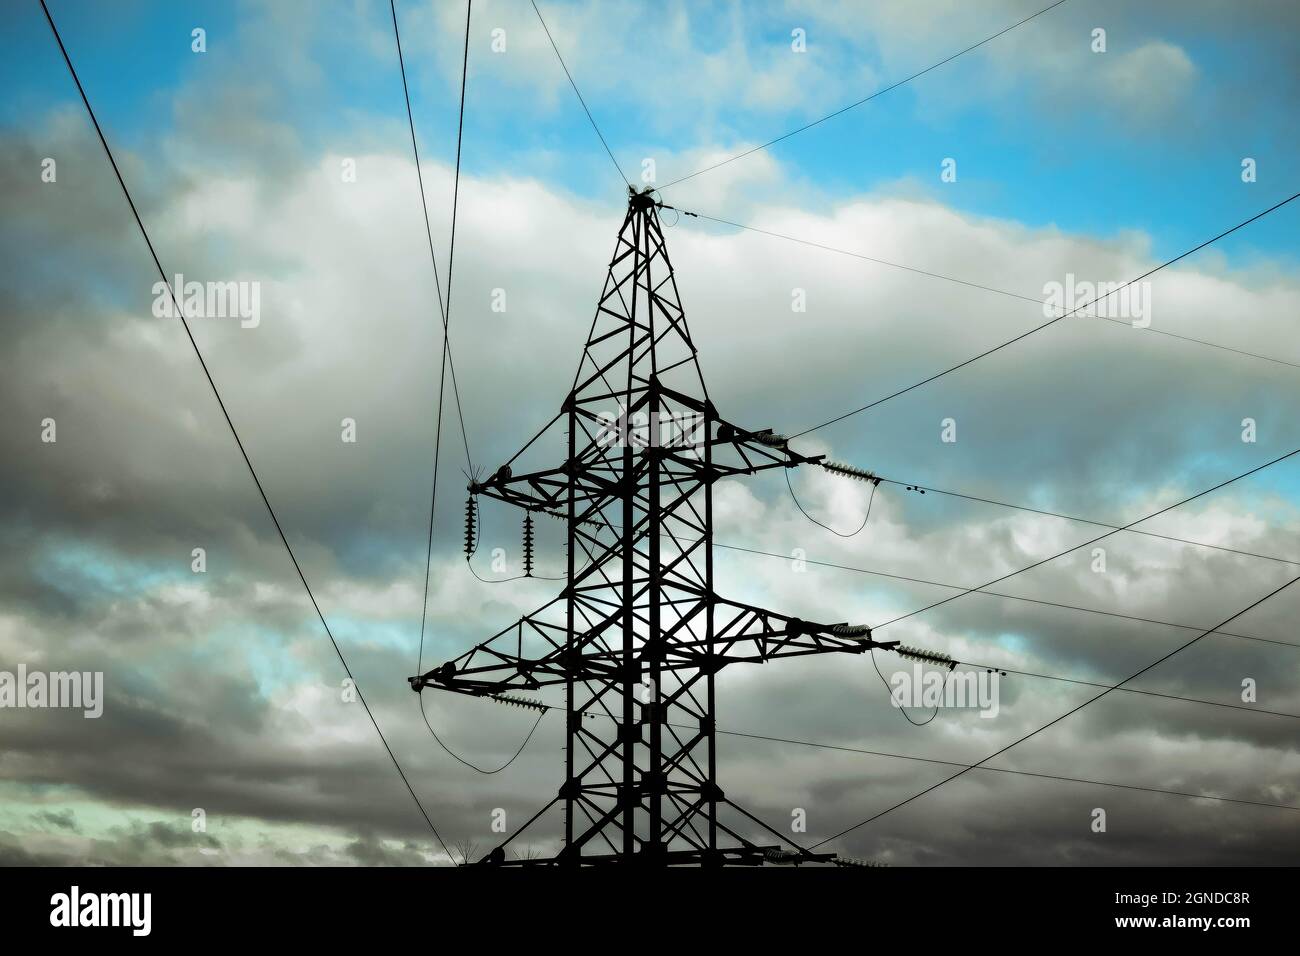 support with electric wires Stock Photo